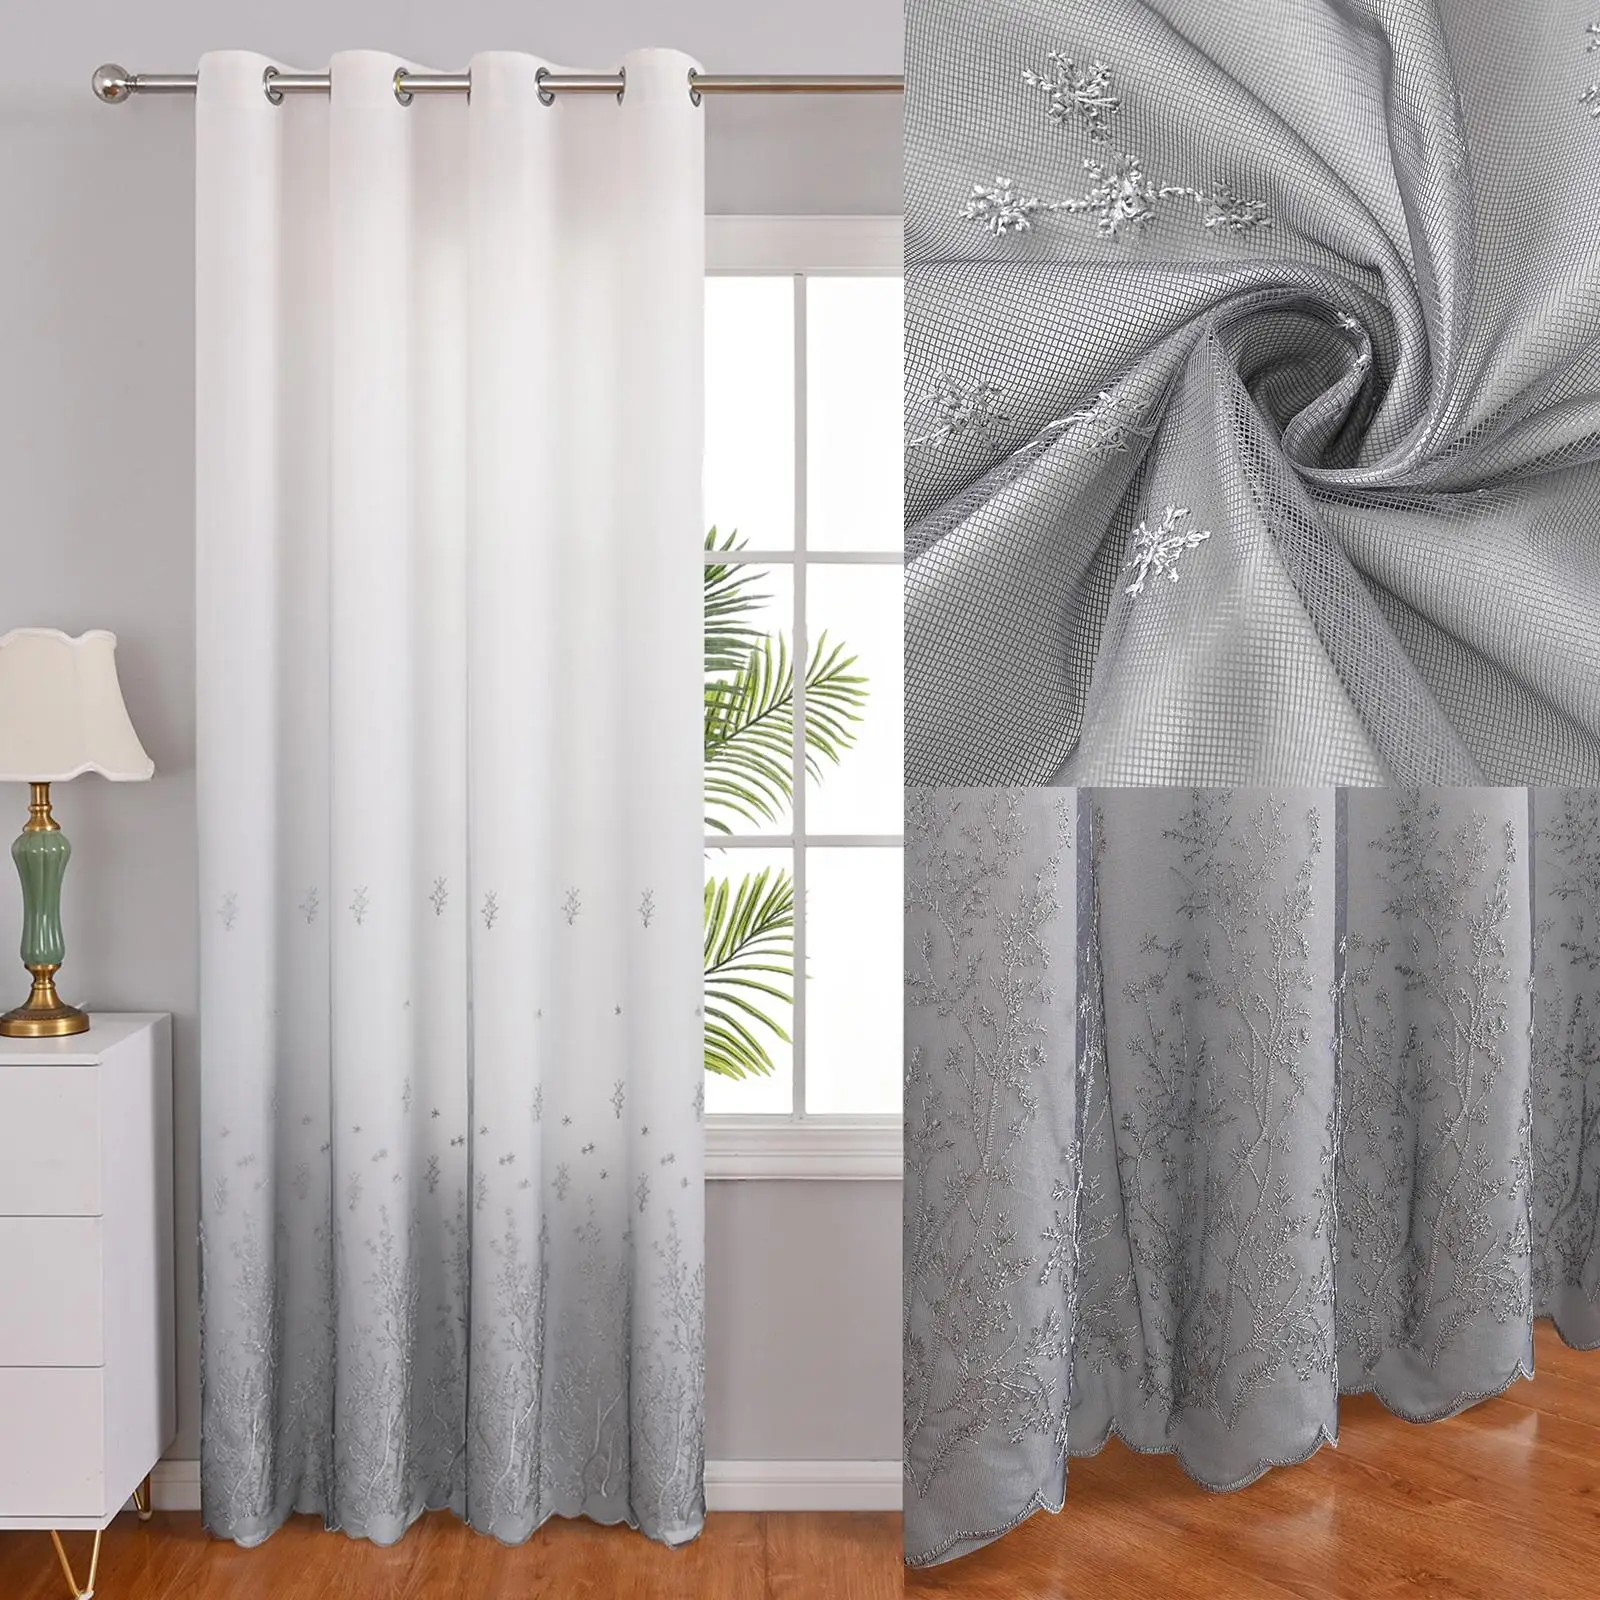 2 Pieces Grommet Curtain Window Treatment Blackout Curtains for Bedroom Home